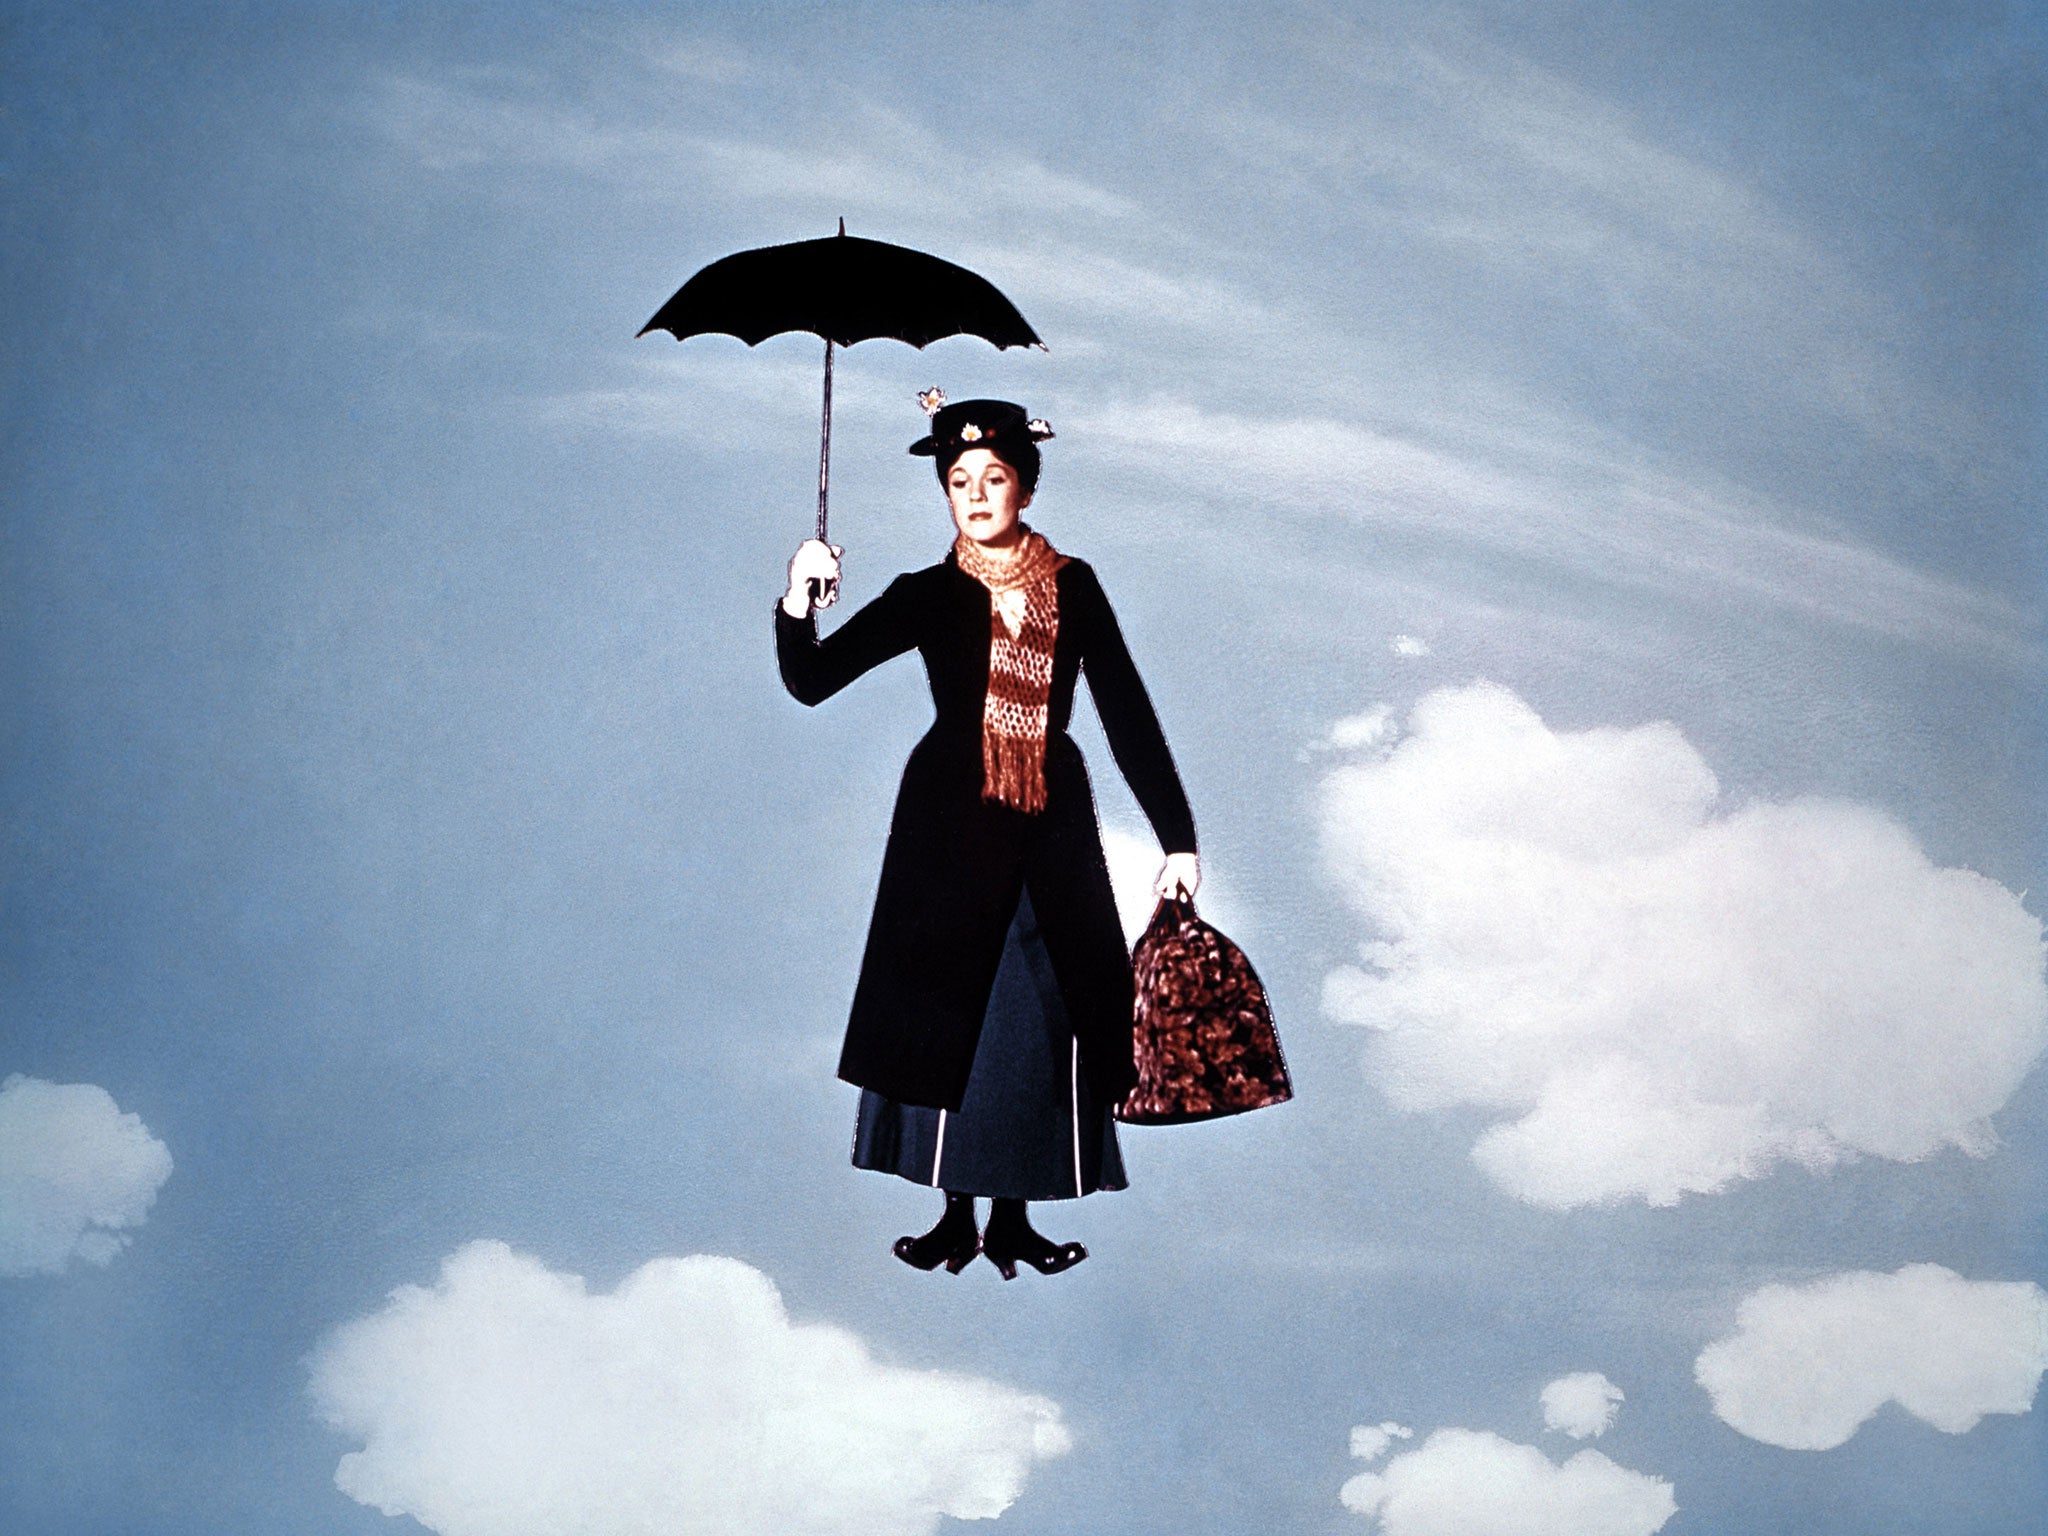 Some people became Mary Poppins-like when drunk, scientists find